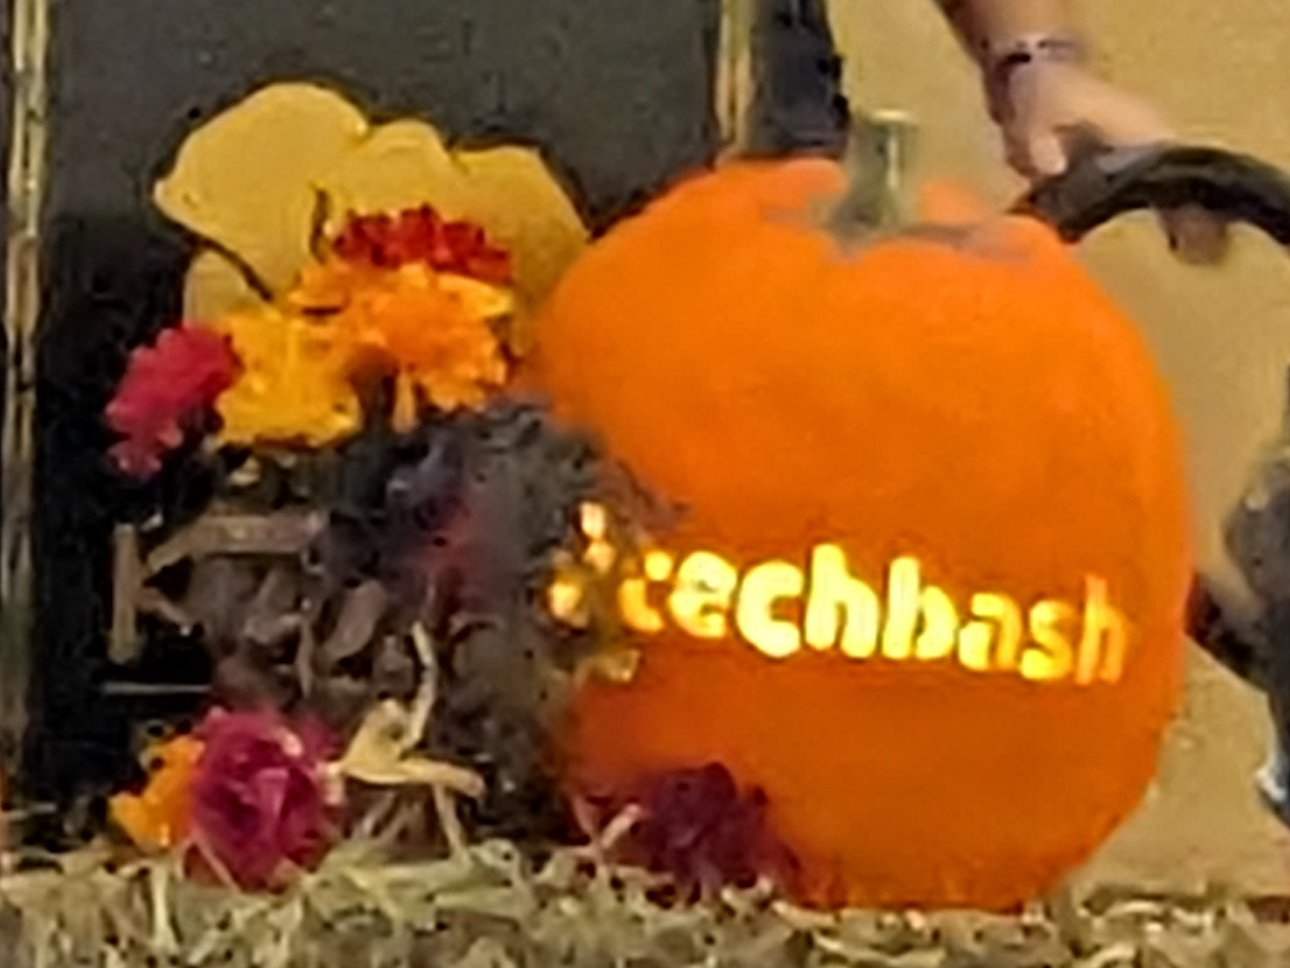 the word #techbash carved into a pumpkin